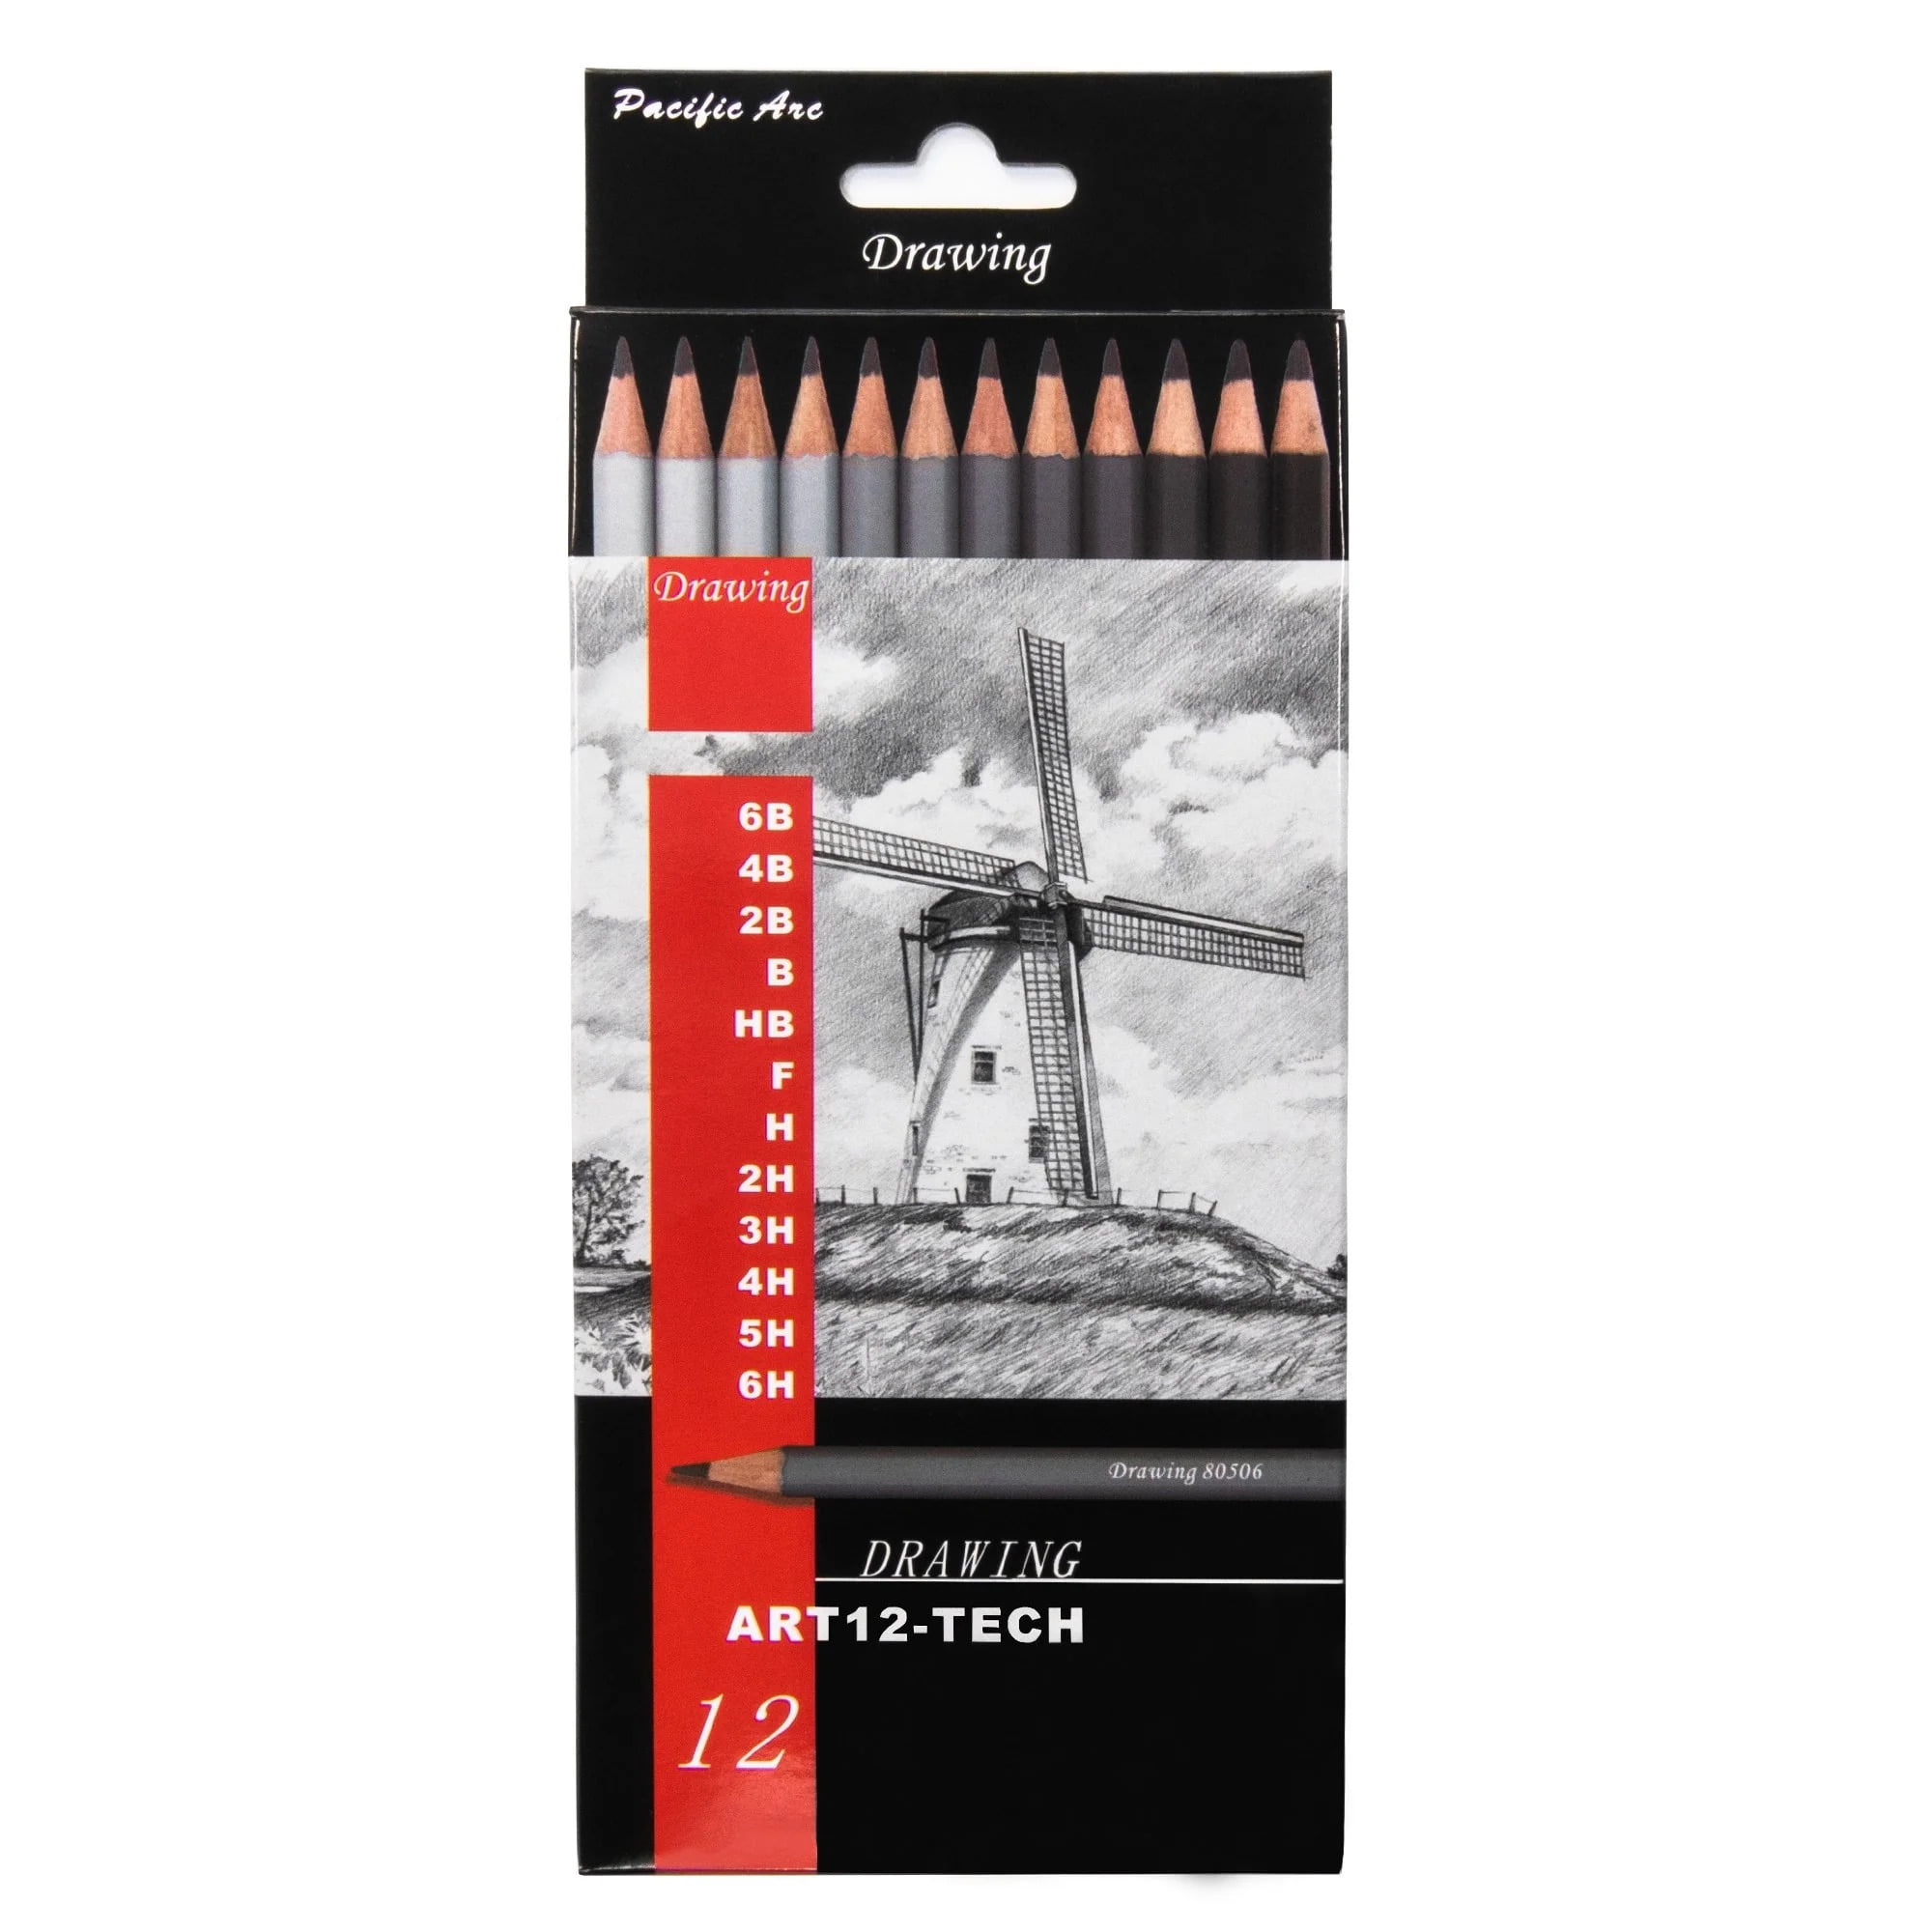 dainayw Graphite Stick Set - Water Soluble - 4B 6B 10B, Art Drawing  Supplies for Sketch & Shading Pencils, Artist Sketching - 3 Pcs